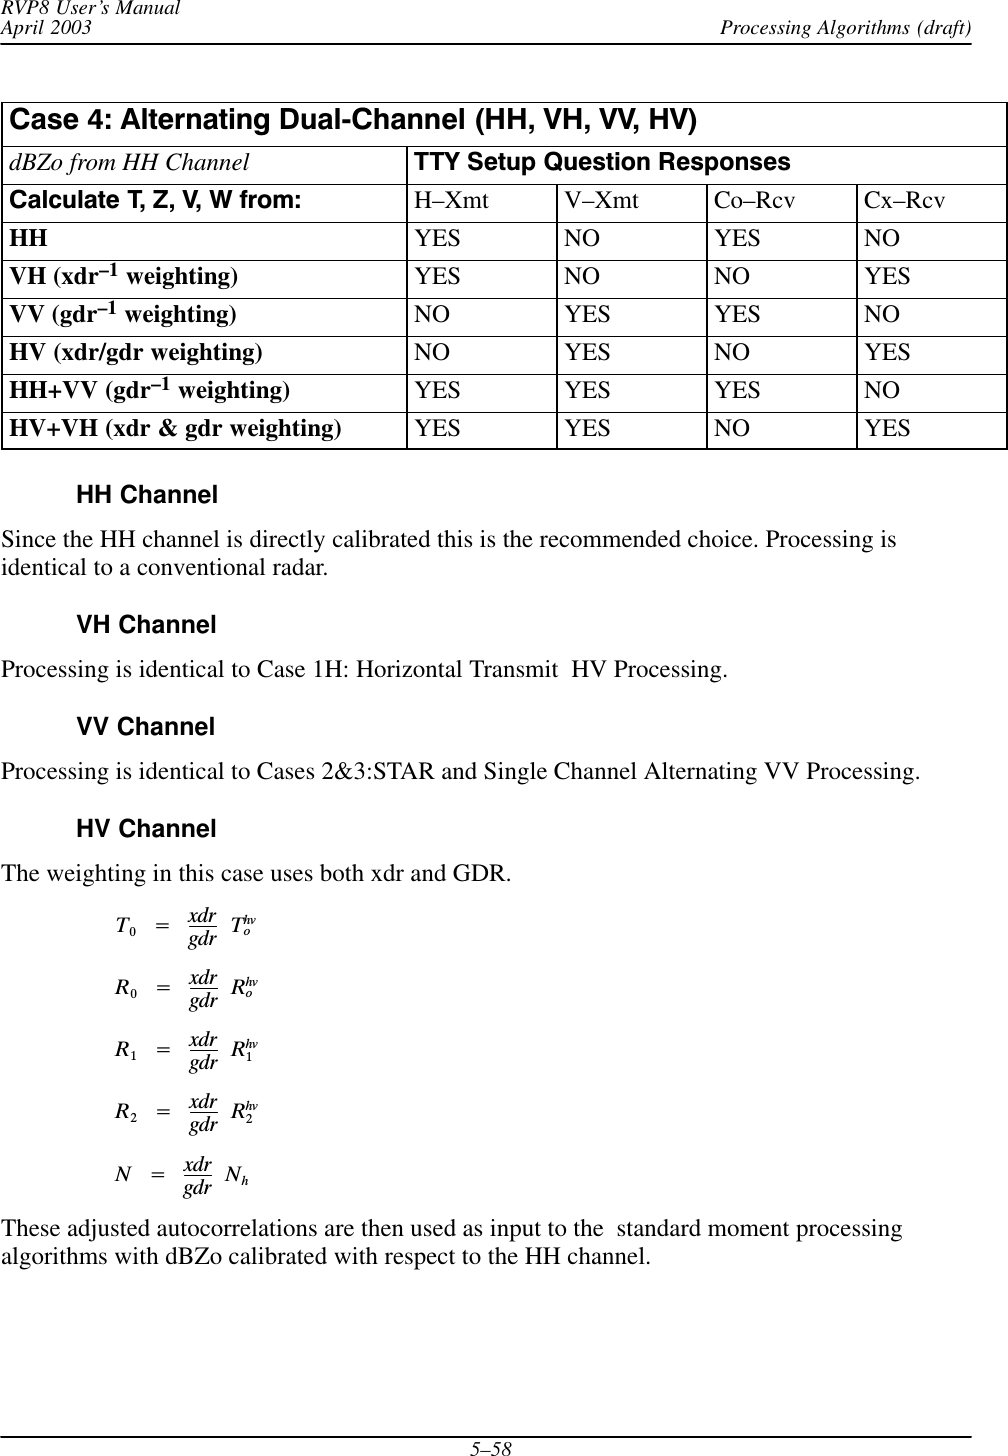 Processing Algorithms (draft)RVP8 User’s ManualApril 20035–58Case 4: Alternating DualĆChannel (HH, VH, VV, HV)dBZo from HH Channel TTY Setup Question ResponsesCalculate T, Z, V, W from: H–Xmt V–Xmt Co–Rcv Cx–RcvHH YES NO YES NOVH (xdr–1 weighting) YES NO NO YESVV (gdr–1 weighting) NO YES YES NOHV (xdr/gdr weighting) NO YES NO YESHH+VV (gdr–1 weighting) YES YES YES NOHV+VH (xdr &amp; gdr weighting) YES YES NO YESHH ChannelSince the HH channel is directly calibrated this is the recommended choice. Processing isidentical to a conventional radar.VH ChannelProcessing is identical to Case 1H: Horizontal Transmit  HV Processing.VV ChannelProcessing is identical to Cases 2&amp;3:STAR and Single Channel Alternating VV Processing.HV ChannelThe weighting in this case uses both xdr and GDR.T0Ą+ĄxdrgdrĄThvoR0Ą+ĄxdrgdrĄRhvoR1Ą+ĄxdrgdrĄRhv1R2Ą+ĄxdrgdrĄRhv2NĄ+ĄxdrgdrĄNhThese adjusted autocorrelations are then used as input to the  standard moment processingalgorithms with dBZo calibrated with respect to the HH channel.